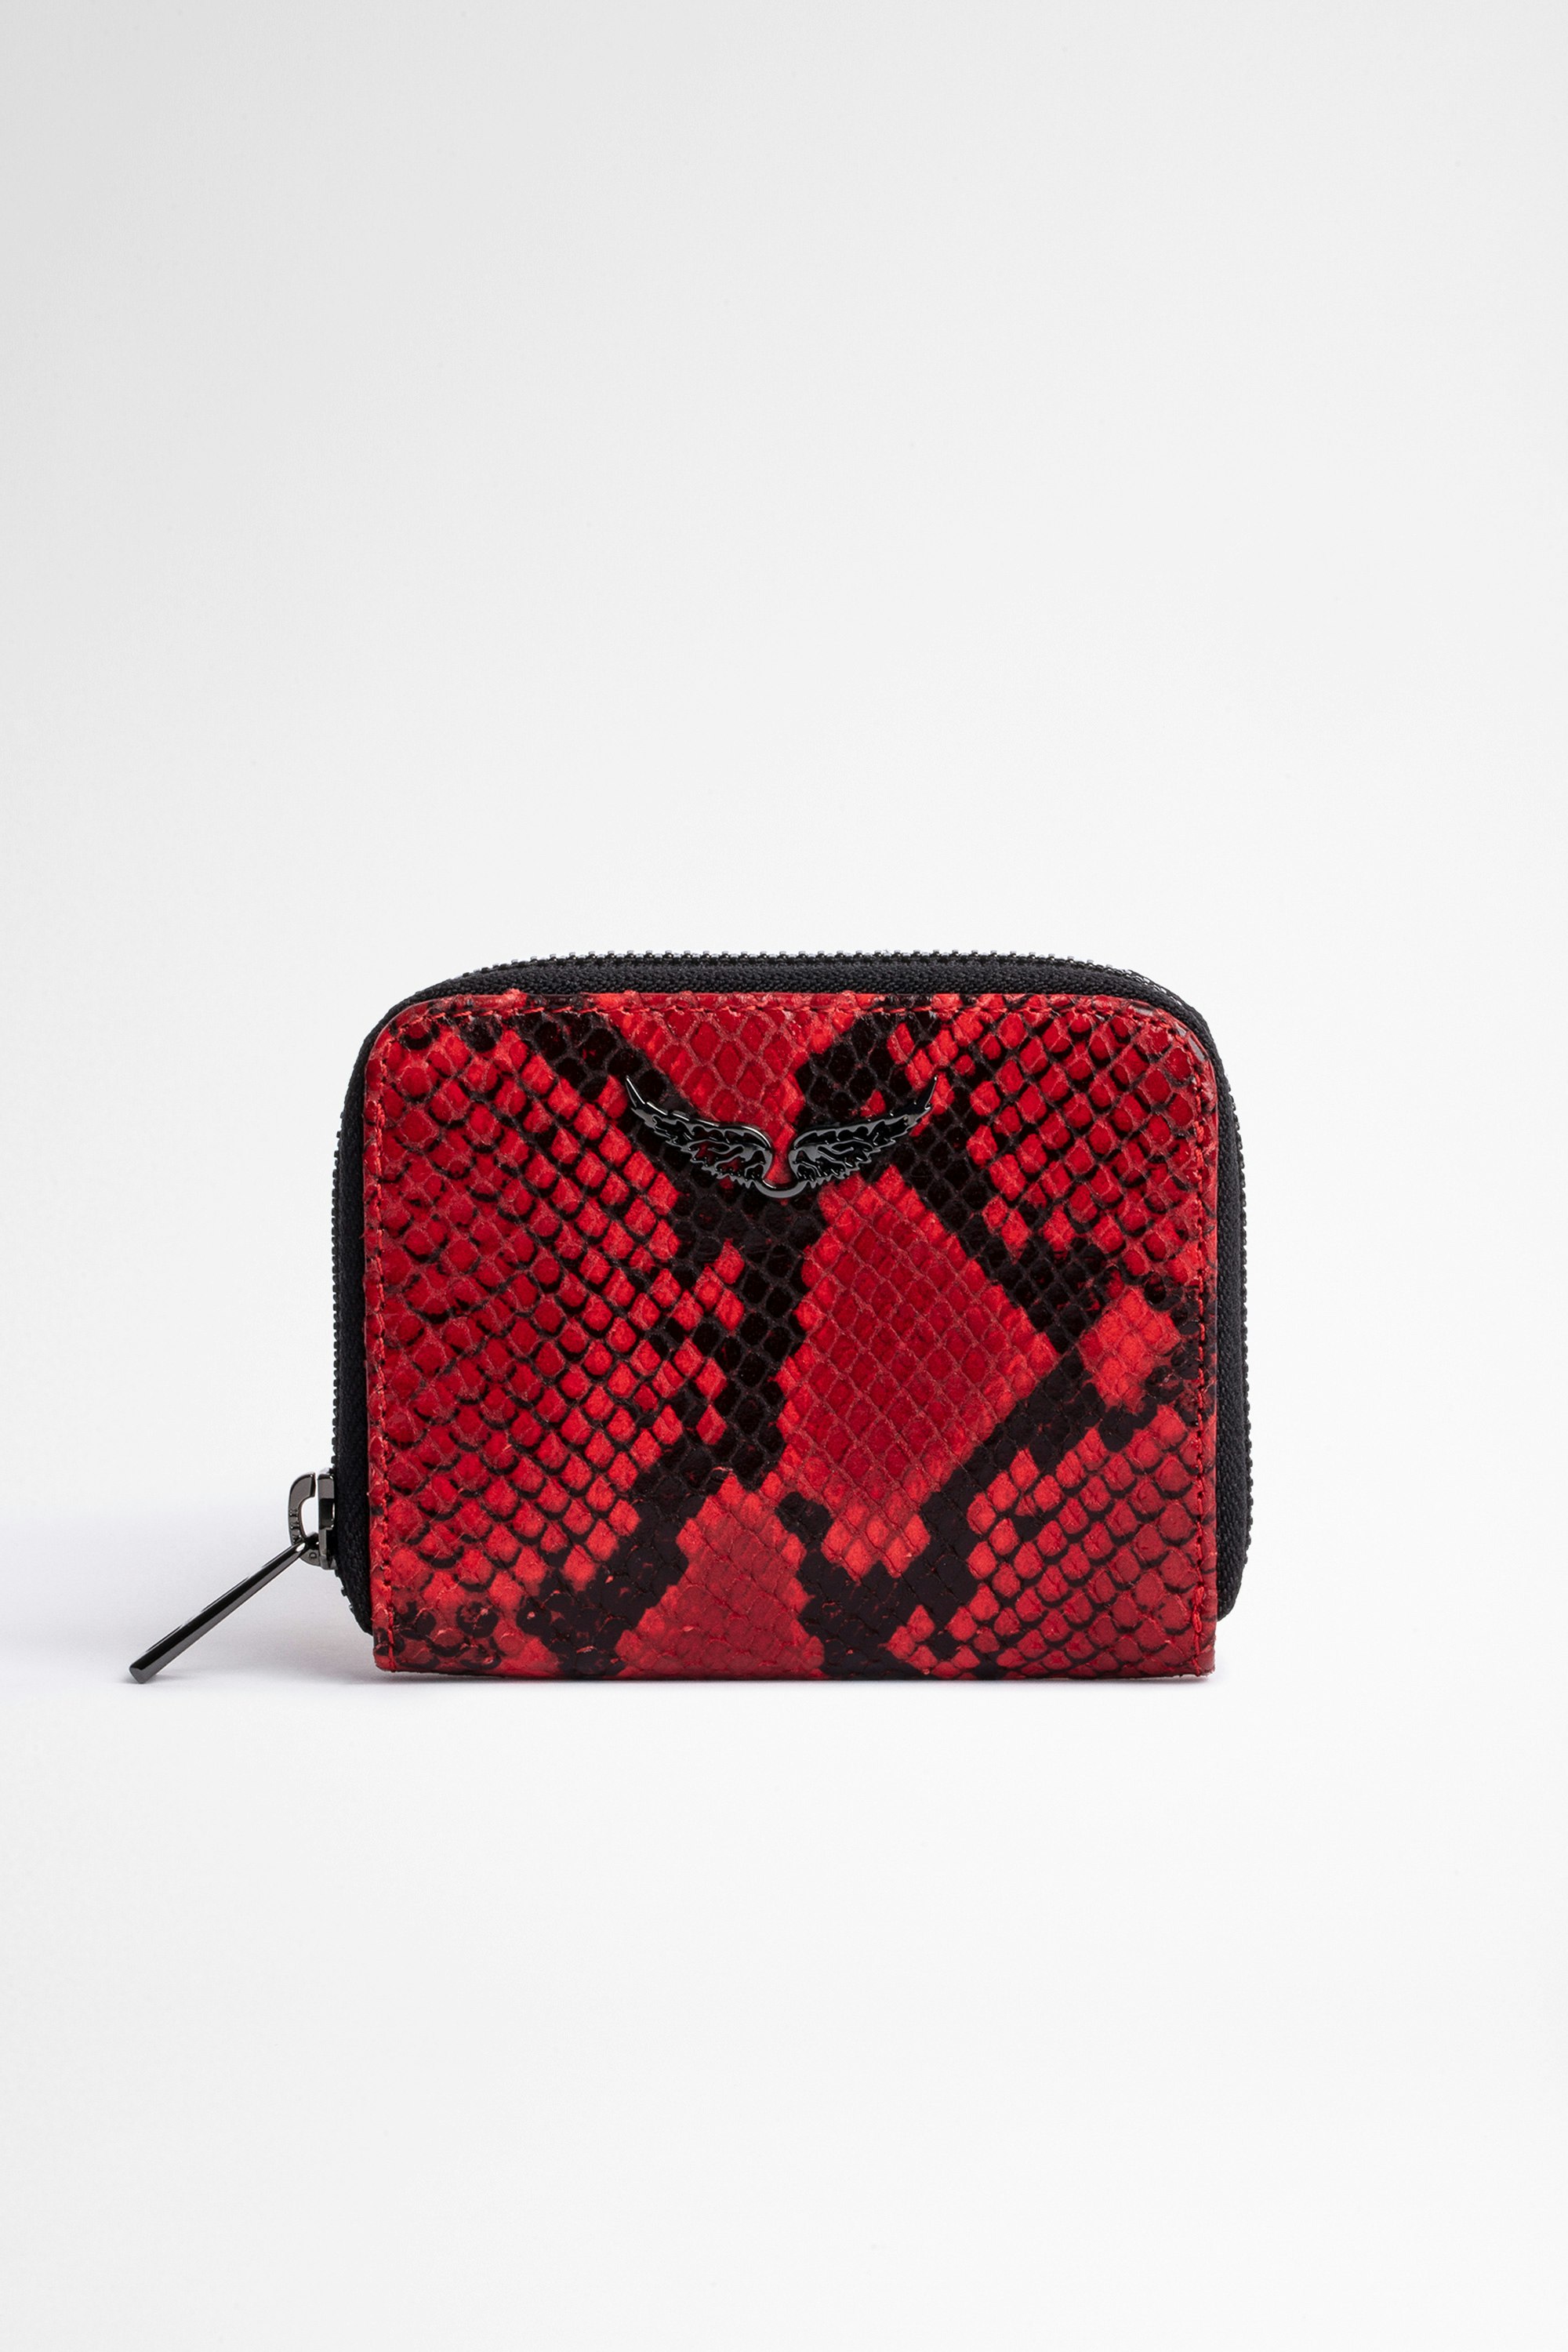 Mini ZV Coin Purse Women's snakeskin-effect red leather wallet